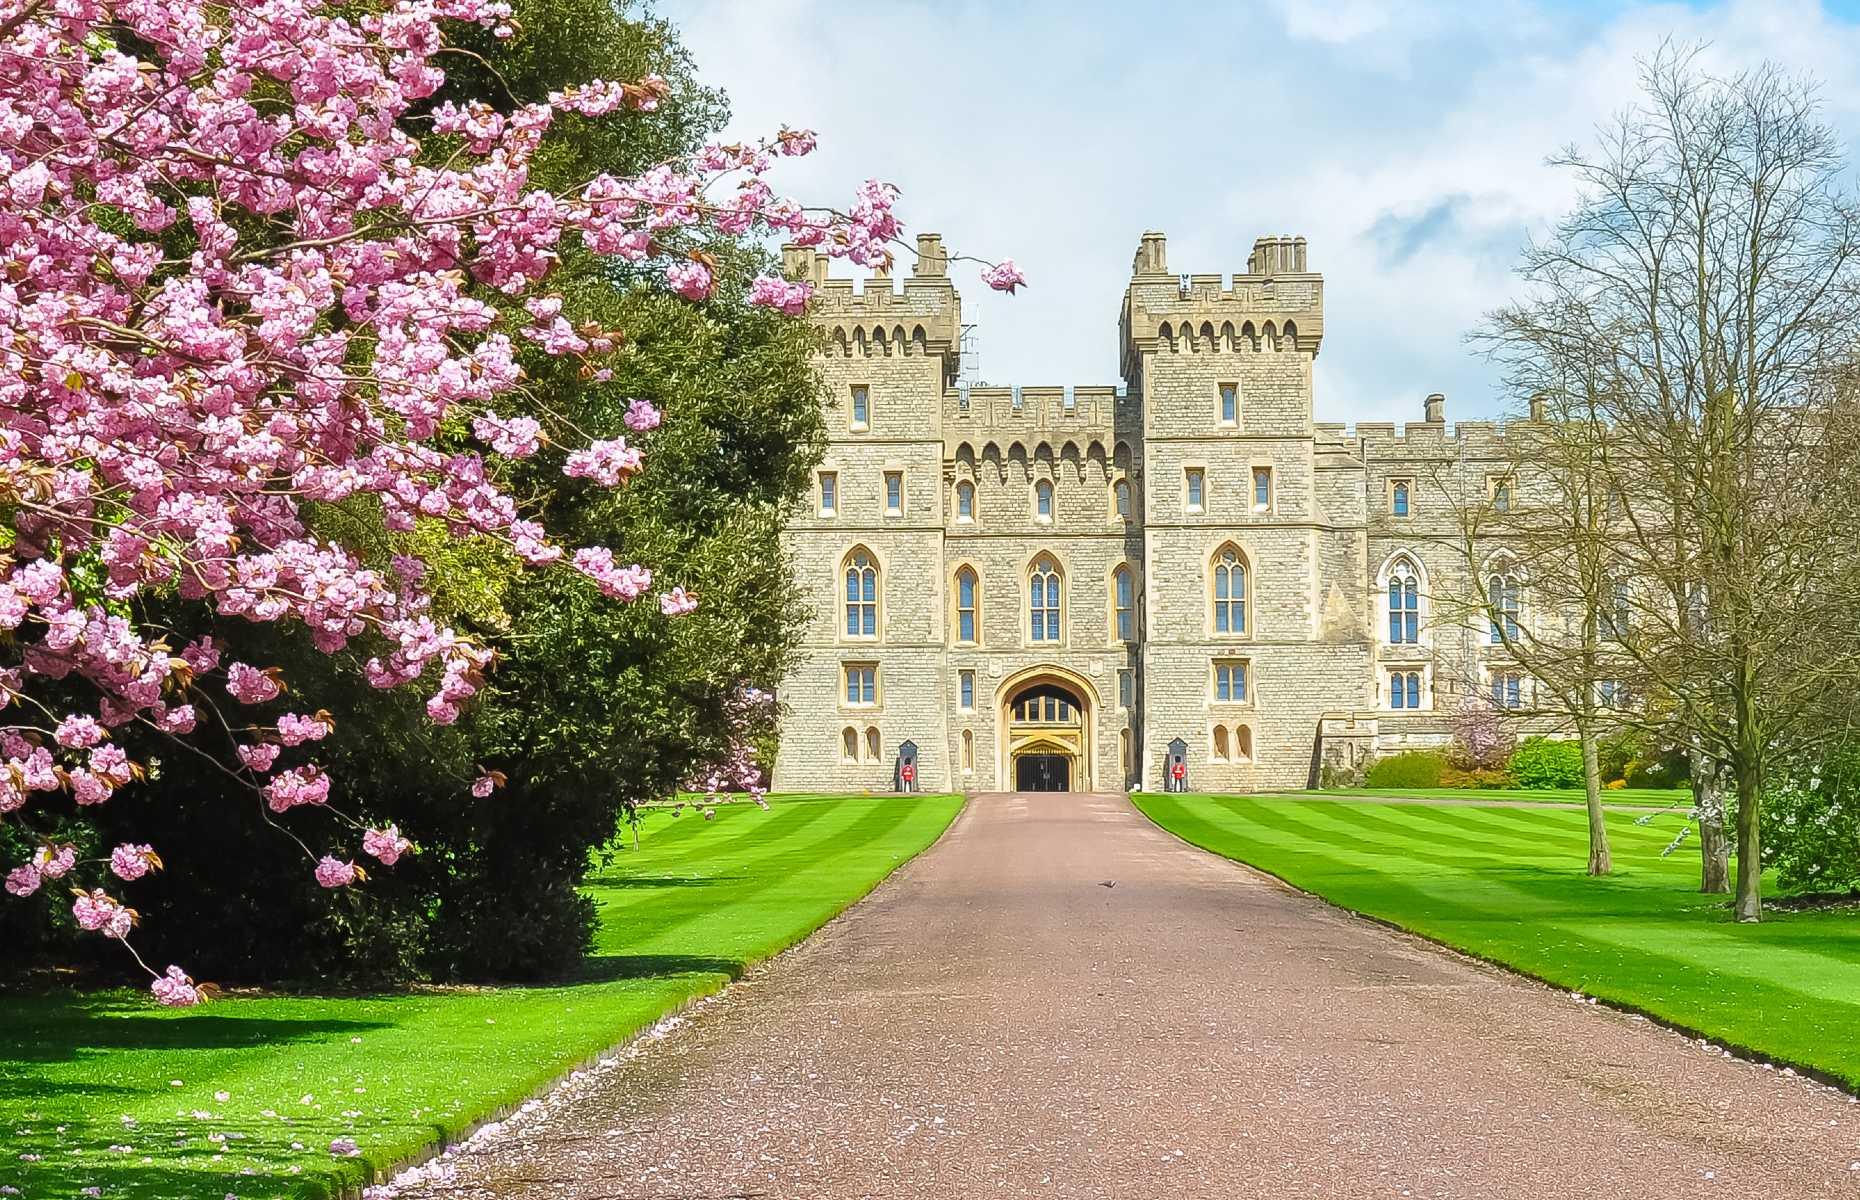 <p>Known as the Queen’s favourite weekend escape, <a href="https://www.rct.uk/visit/windsor-castle">Windsor Castle</a> is the oldest and largest occupied castle in the world. Sitting high above the River Thames and on the edge of a Saxon hunting ground, the fortress was originally built in the 11th century by William the Conqueror to guard the western approach to London. Today it’s still a working palace and location for royal weddings including Prince Harry and Meghan Markle's in 2018.</p>